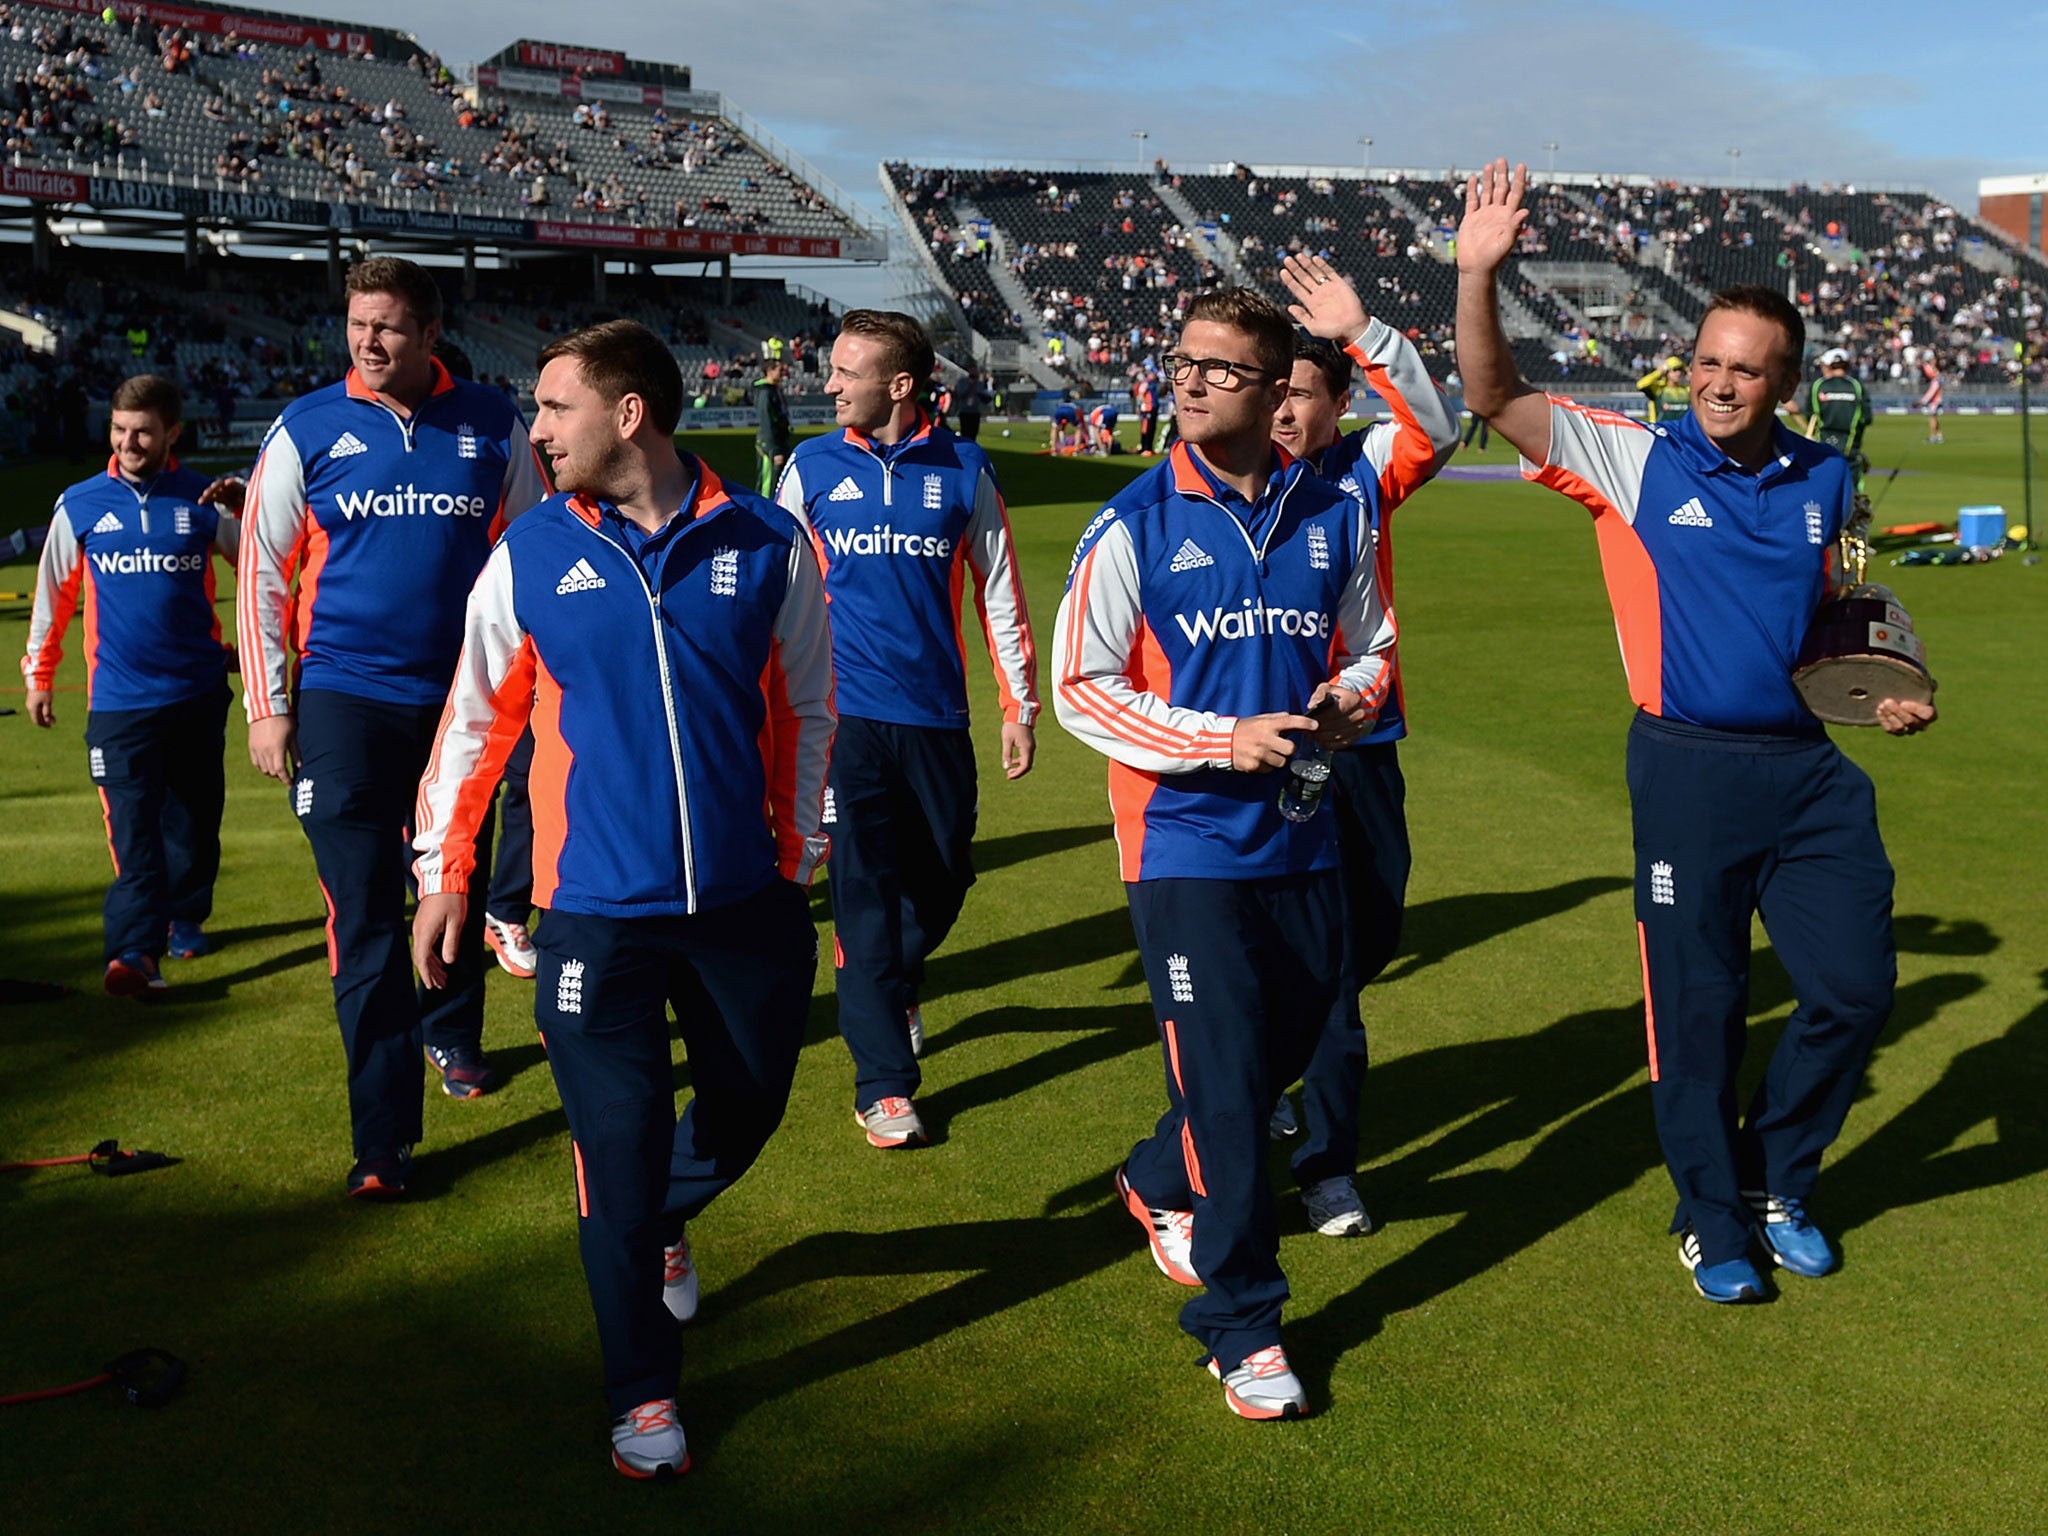 The England Disability team enjoy a lap of honour after their series win against Bangladesh, September 2015